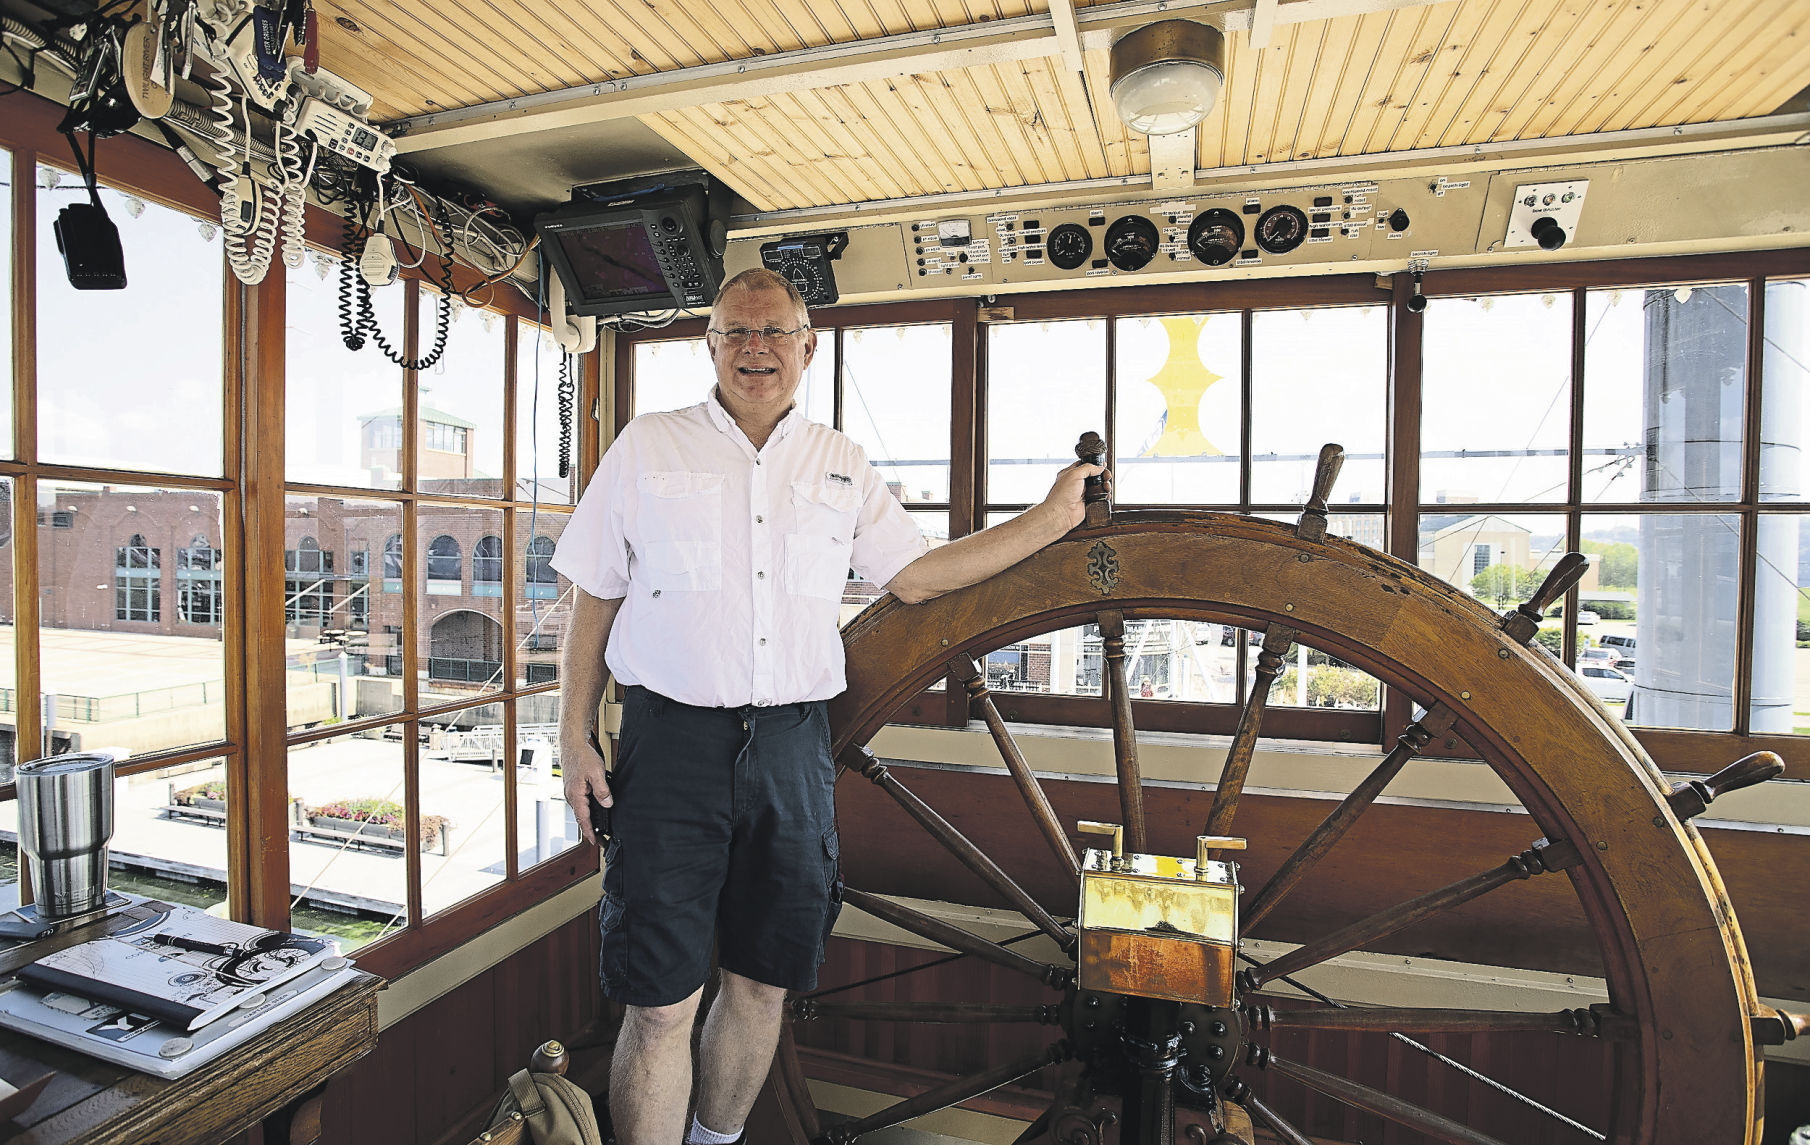 Captain Kevin Stier is the pilot of the Riverboat Twilight.    PHOTO CREDIT: Stephen Gassman